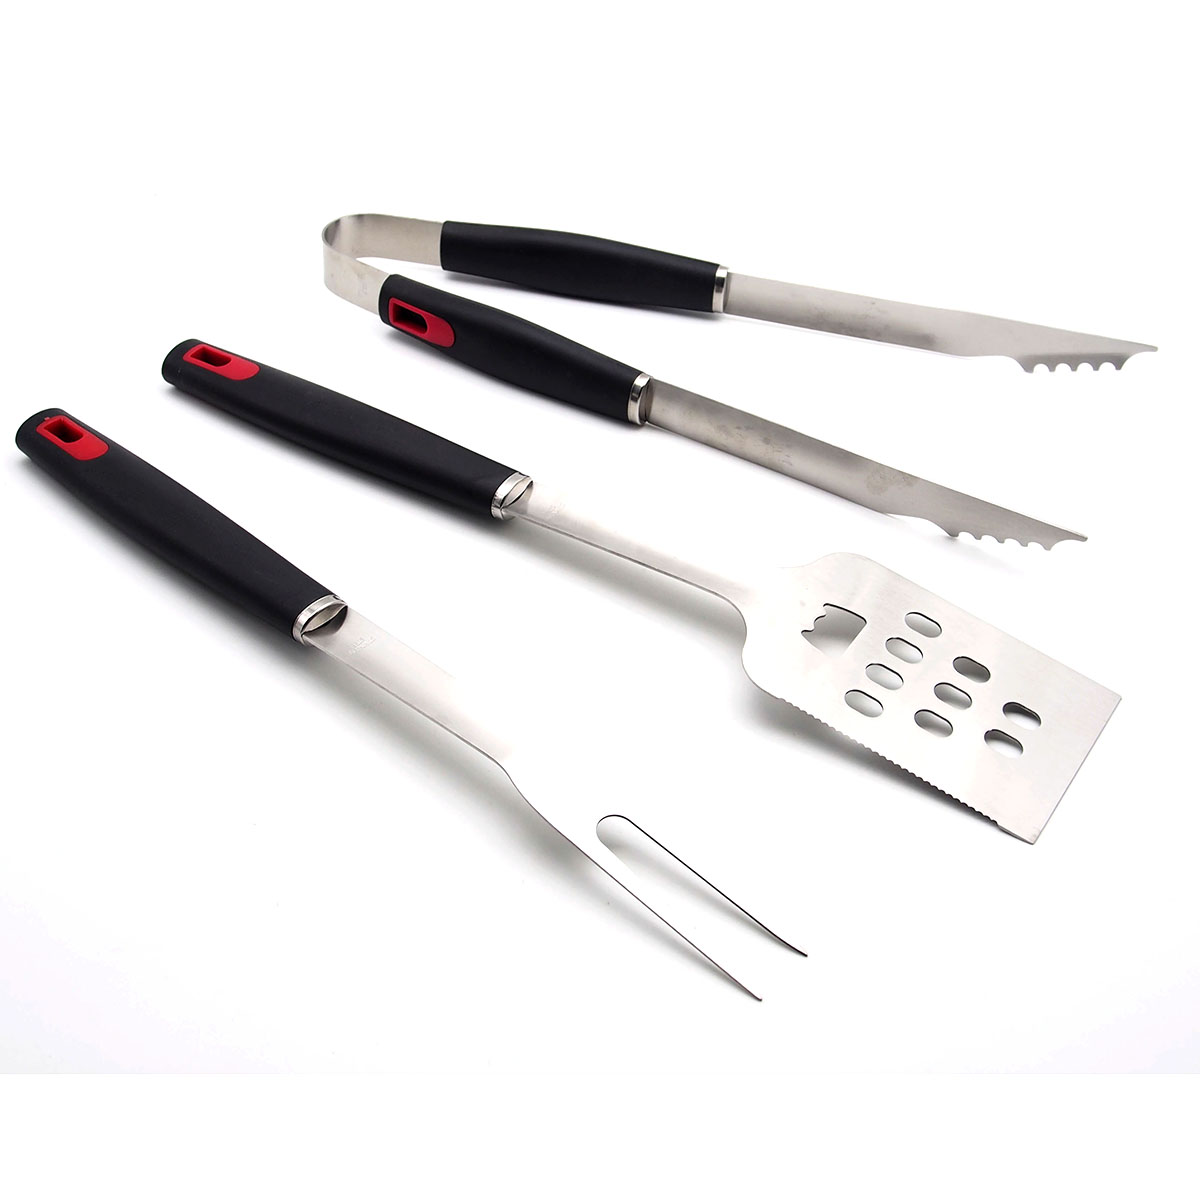 4PCS-BBQ-Stainless-Steel-Barbecue-Utensils-Kit-Outdoor-Grill-Tools-Brush-Tong-Tools-Kit-1708219-6